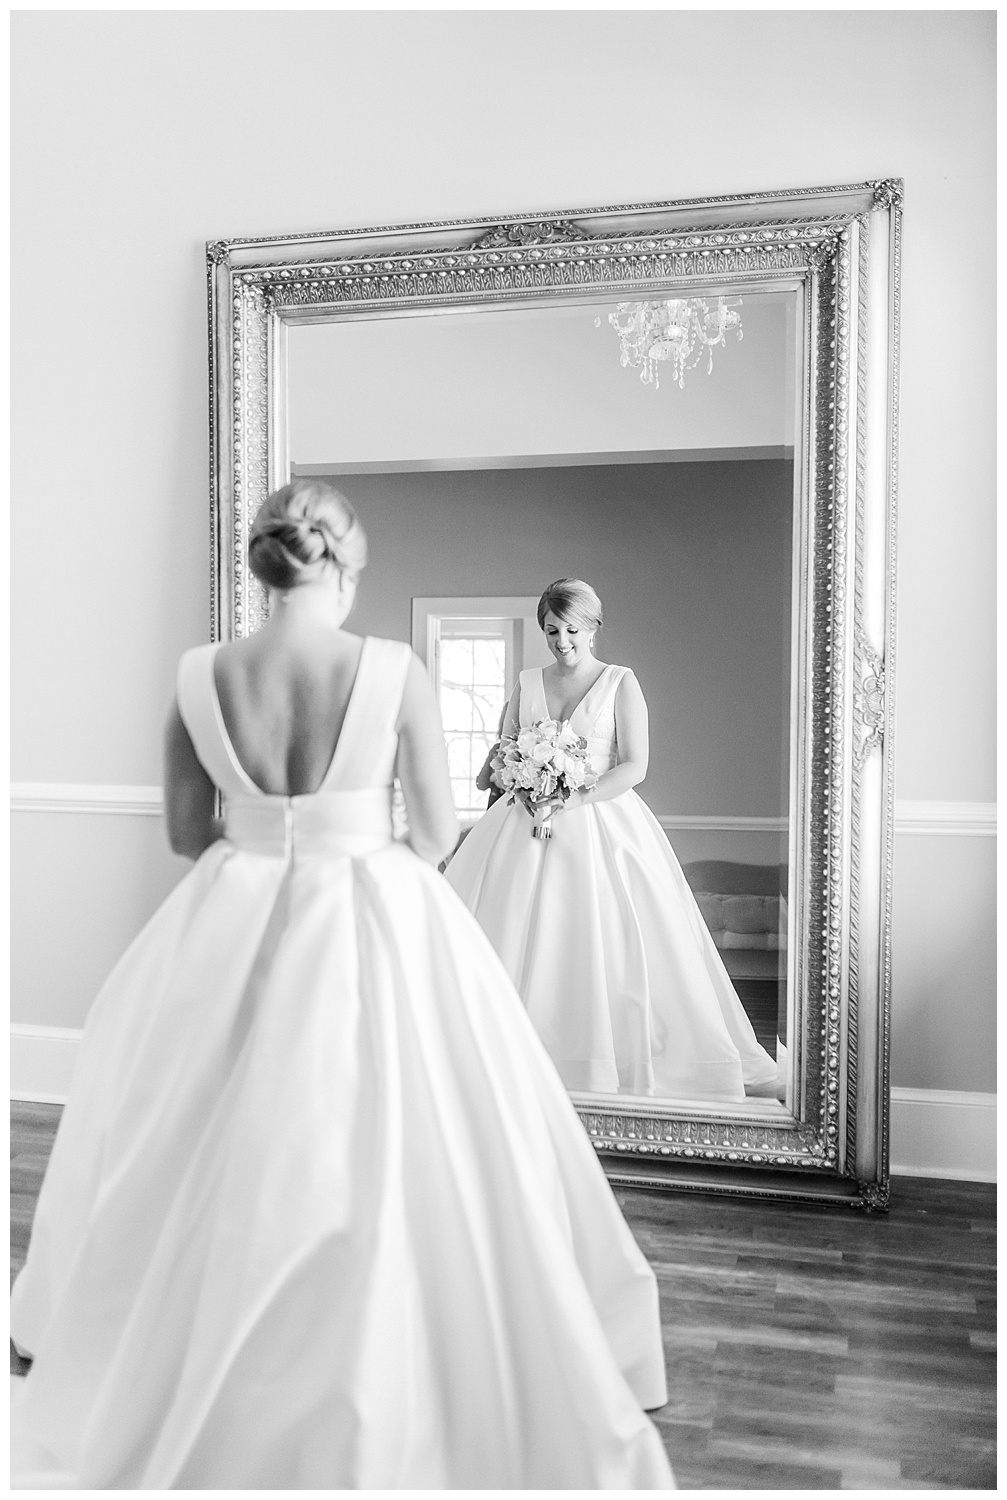 Bridal Portraits at the Separk Mansion in Charlotte NC